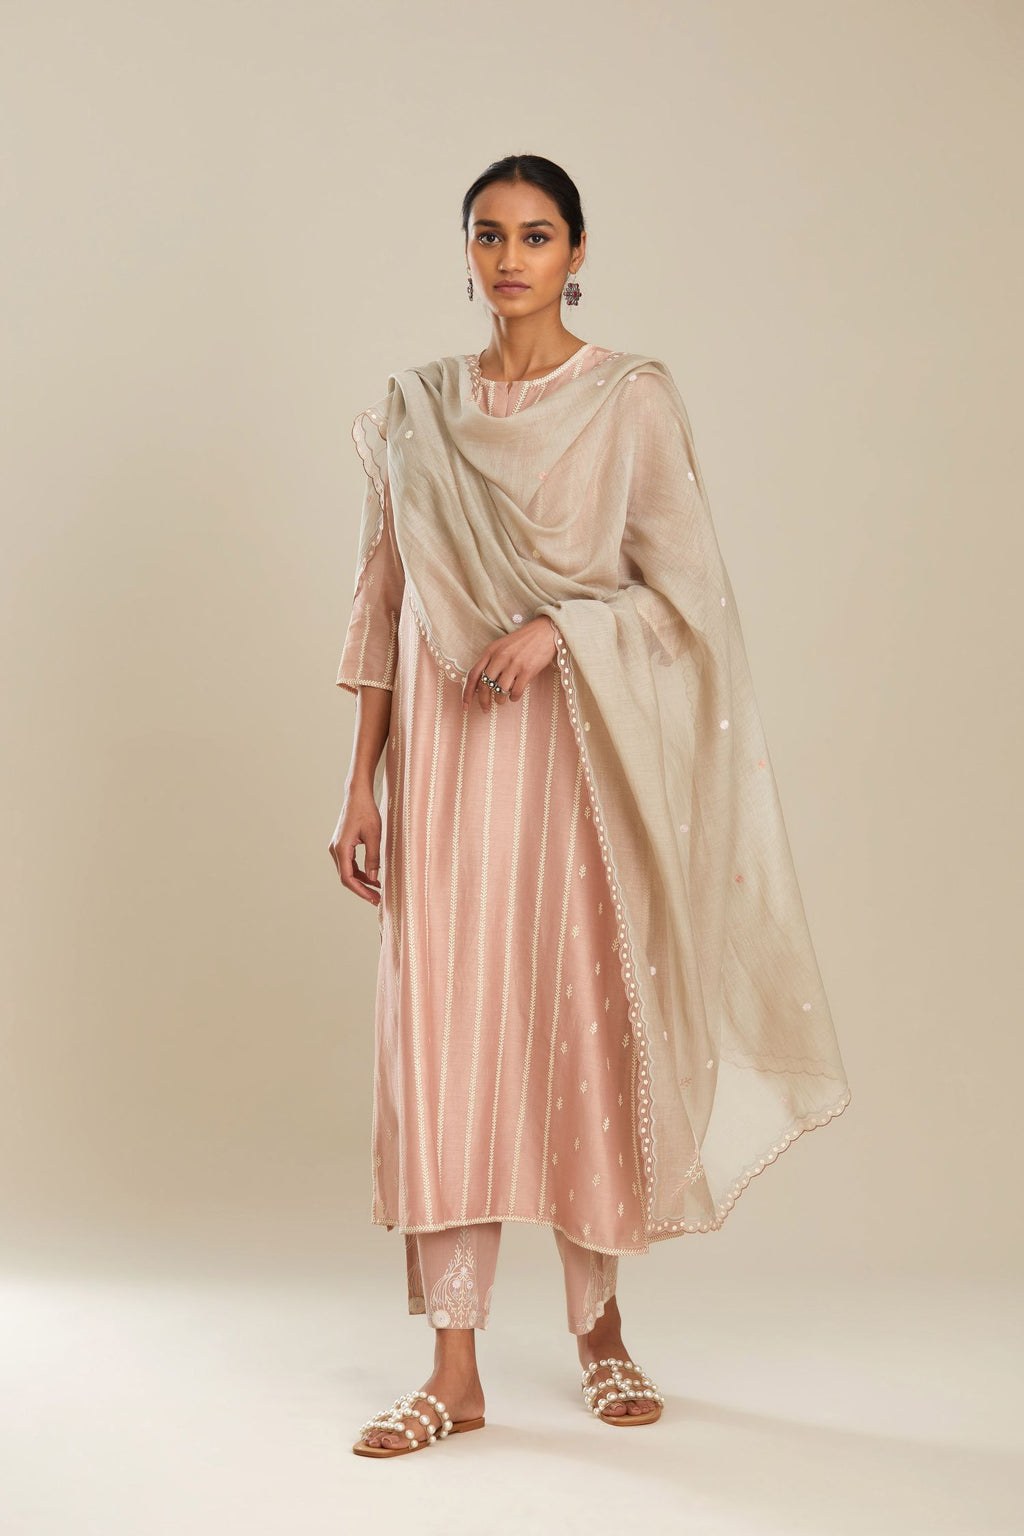 Old rose silk chanderi kurta set with striped embroidery in central panel and embroidered bootis at side panels.